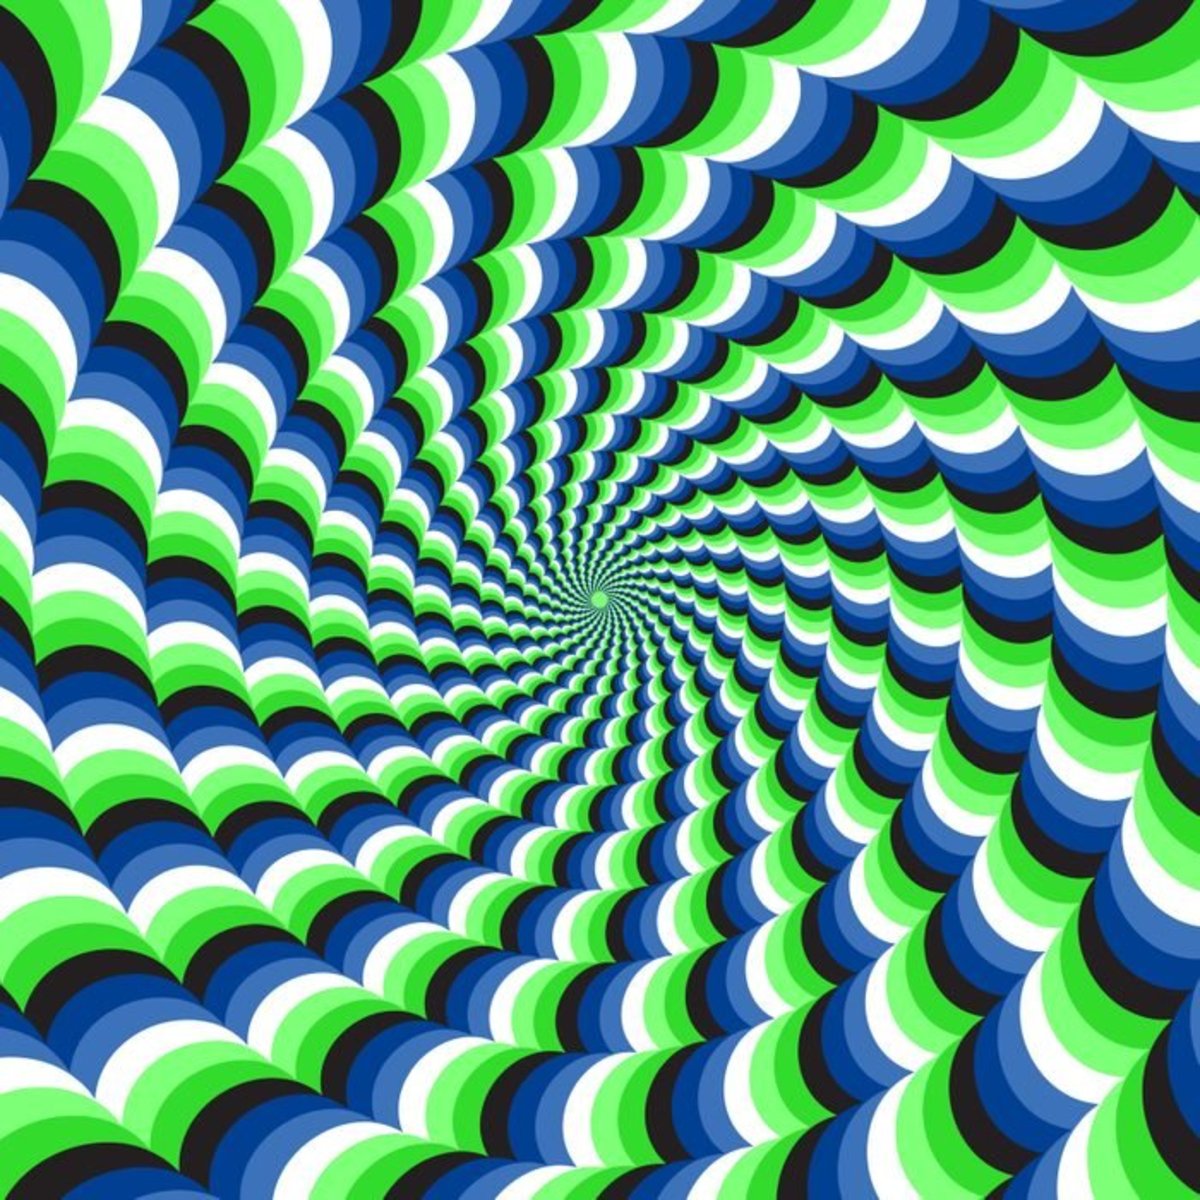 This pattern of this optical illusion makes it appear as though the image is moving. 